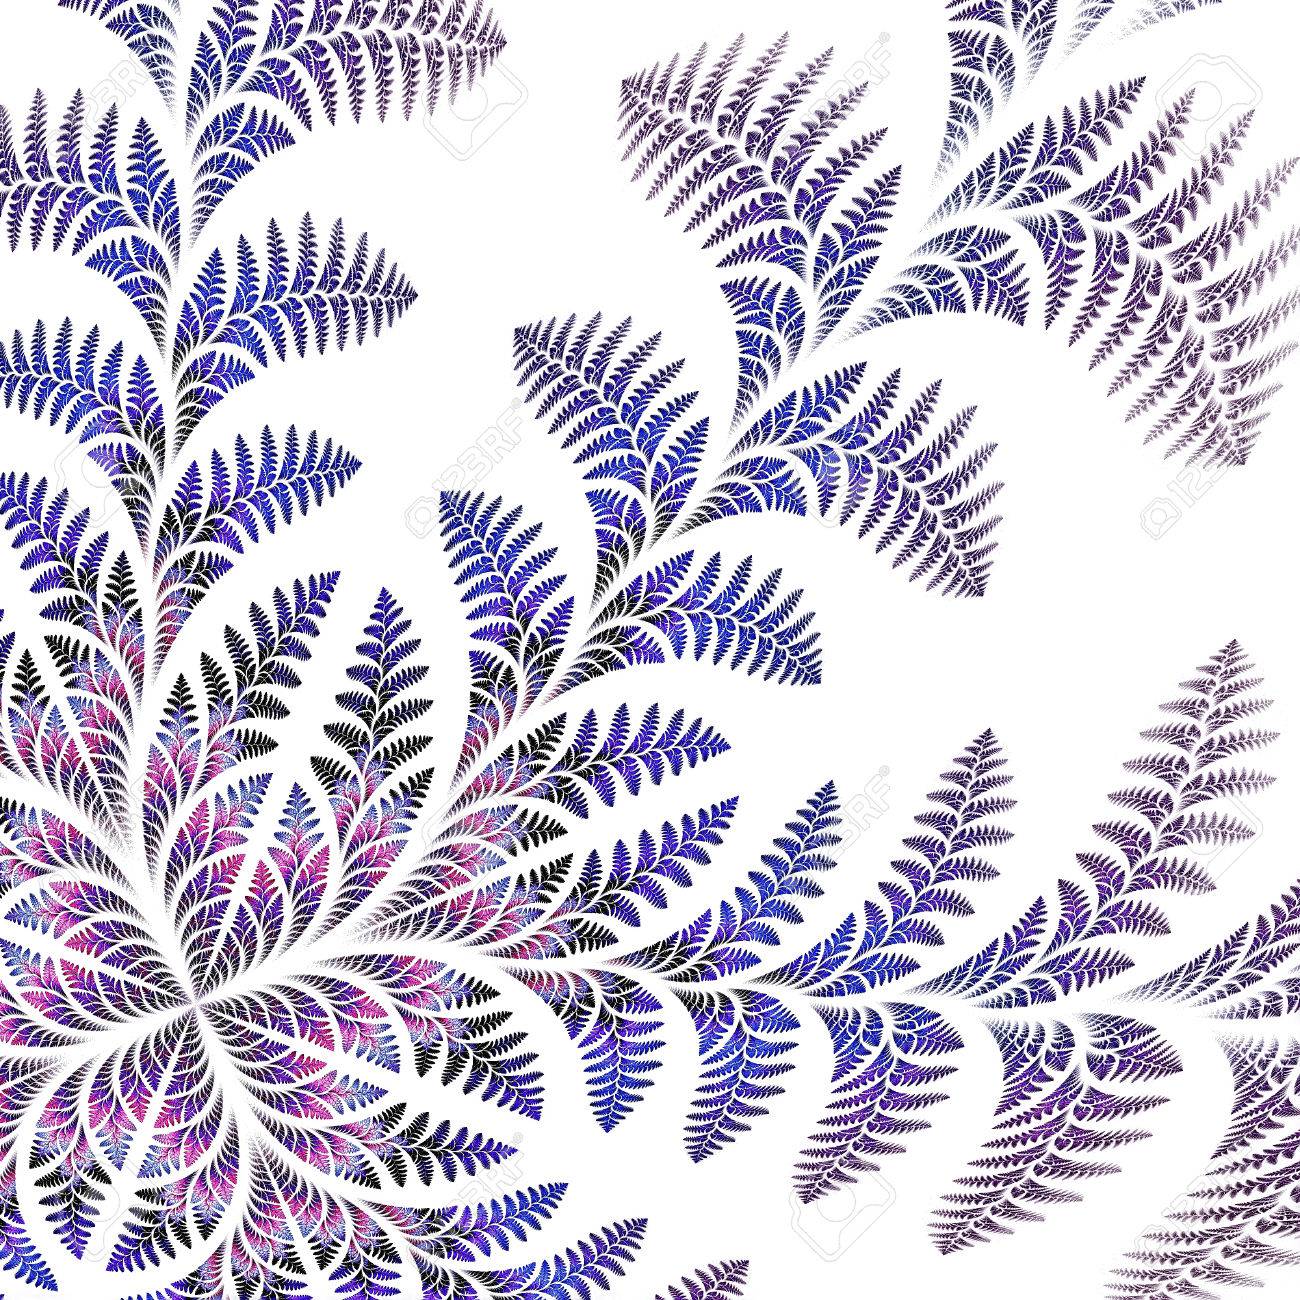 Fabulous Asymmetrical Pattern Of The Leaves On White Background 1300x1300